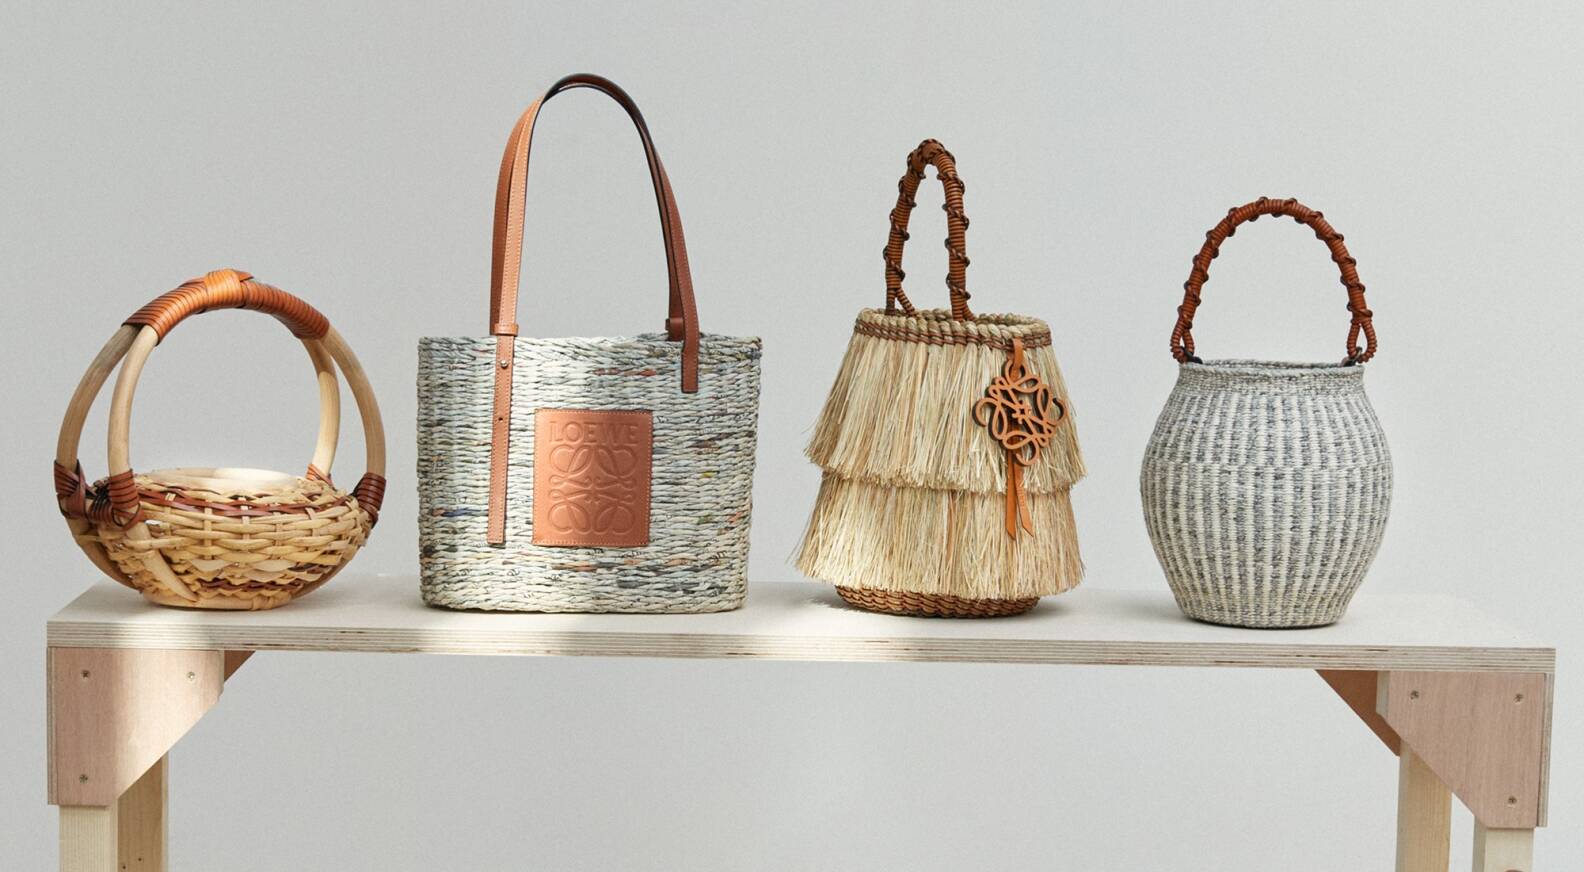 Loewe brings new life to objects with Weave, Restore, Renew